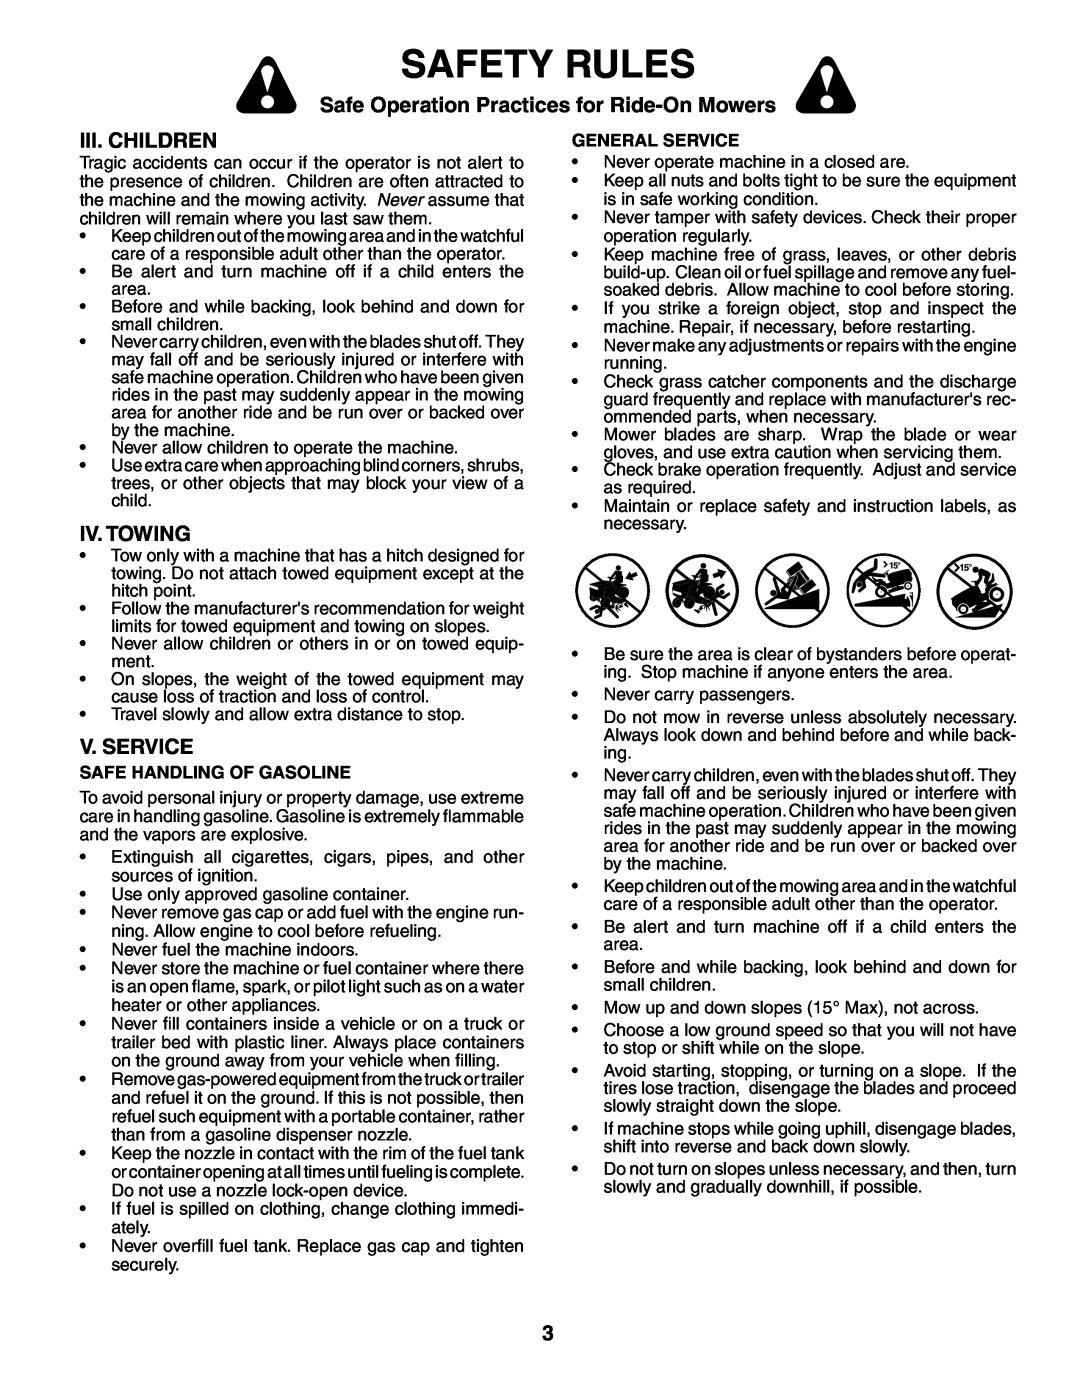 Poulan PD24PH48ST manual Iii. Children, Iv. Towing, V. Service, Safety Rules, Safe Operation Practices for Ride-On Mowers 